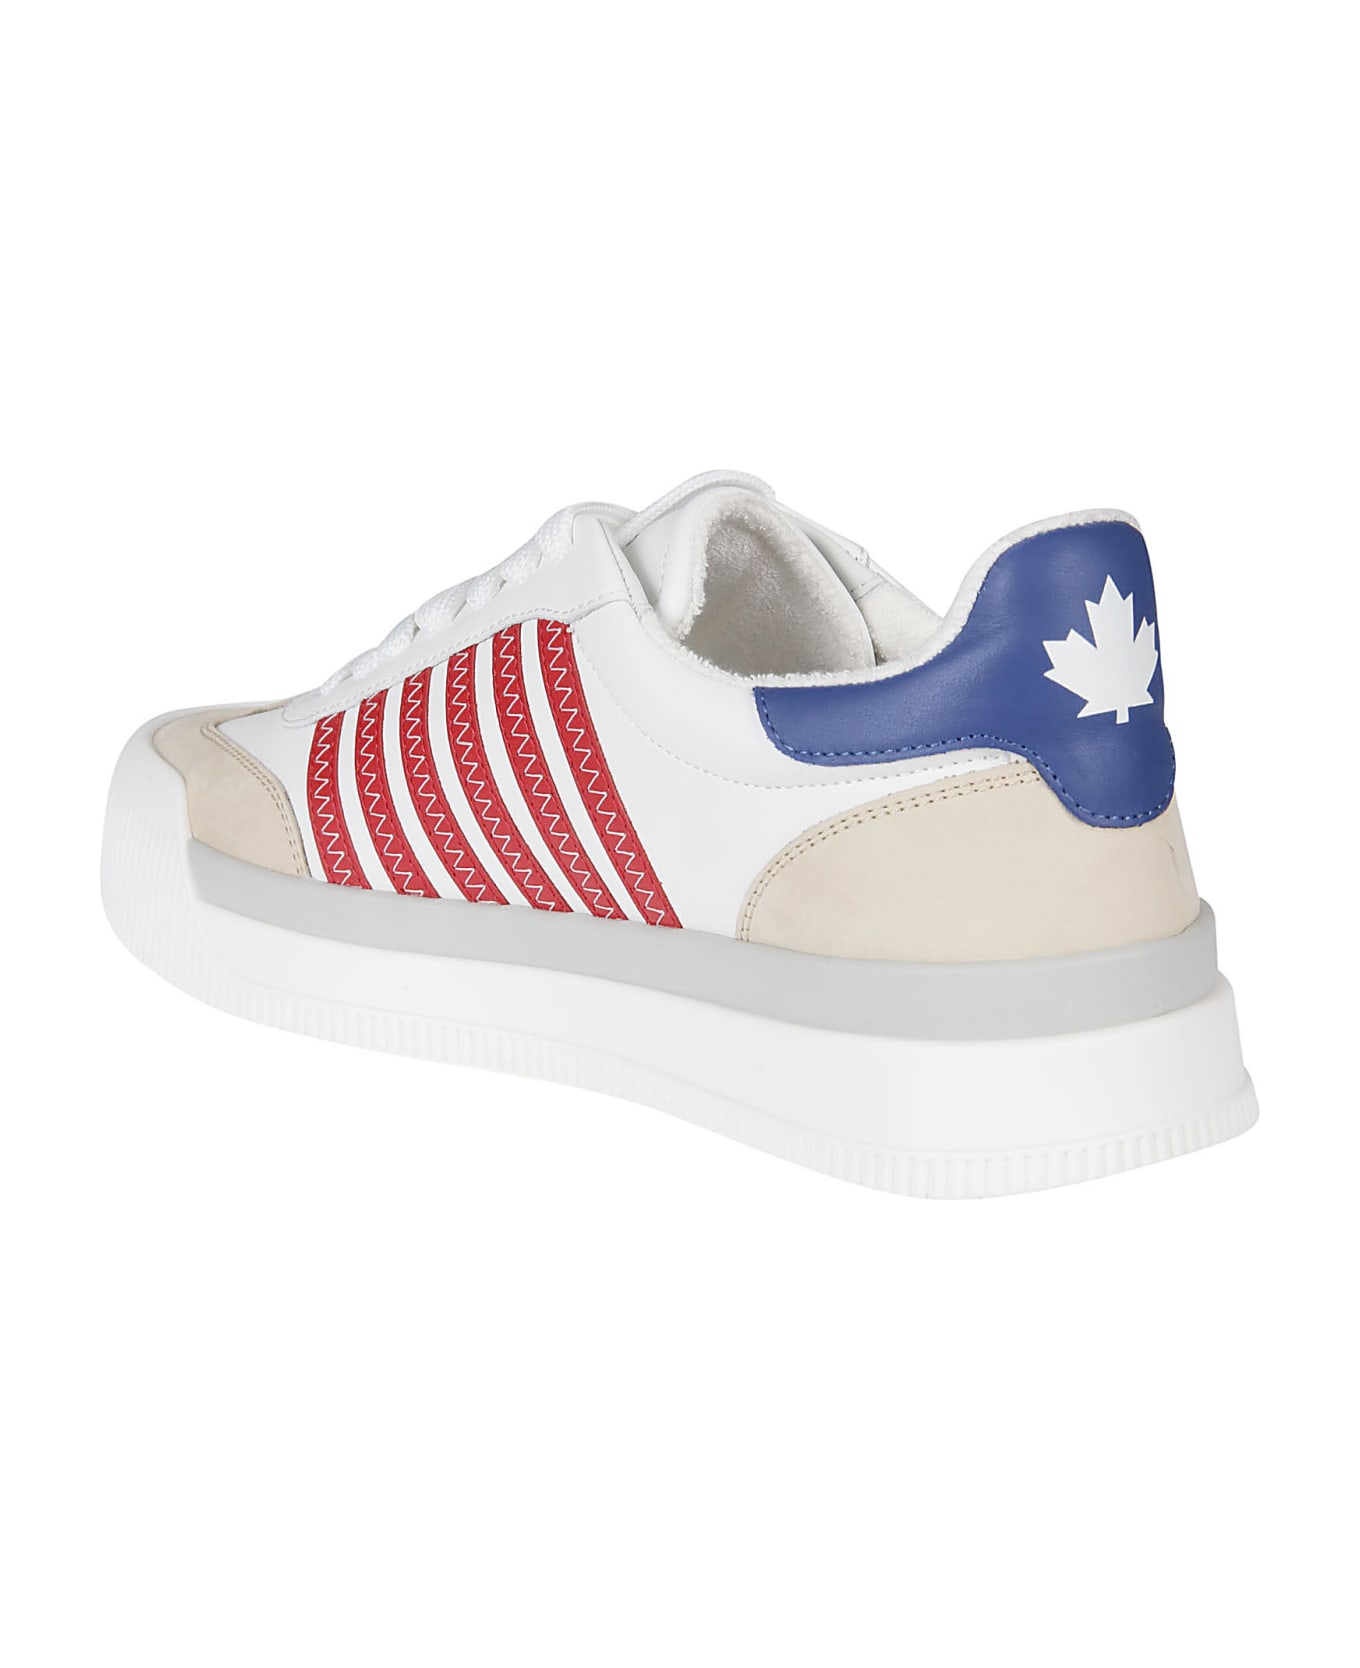 Dsquared2 New Jersey Lace-up Low Top Sneakers - Bianco/rosso/blu